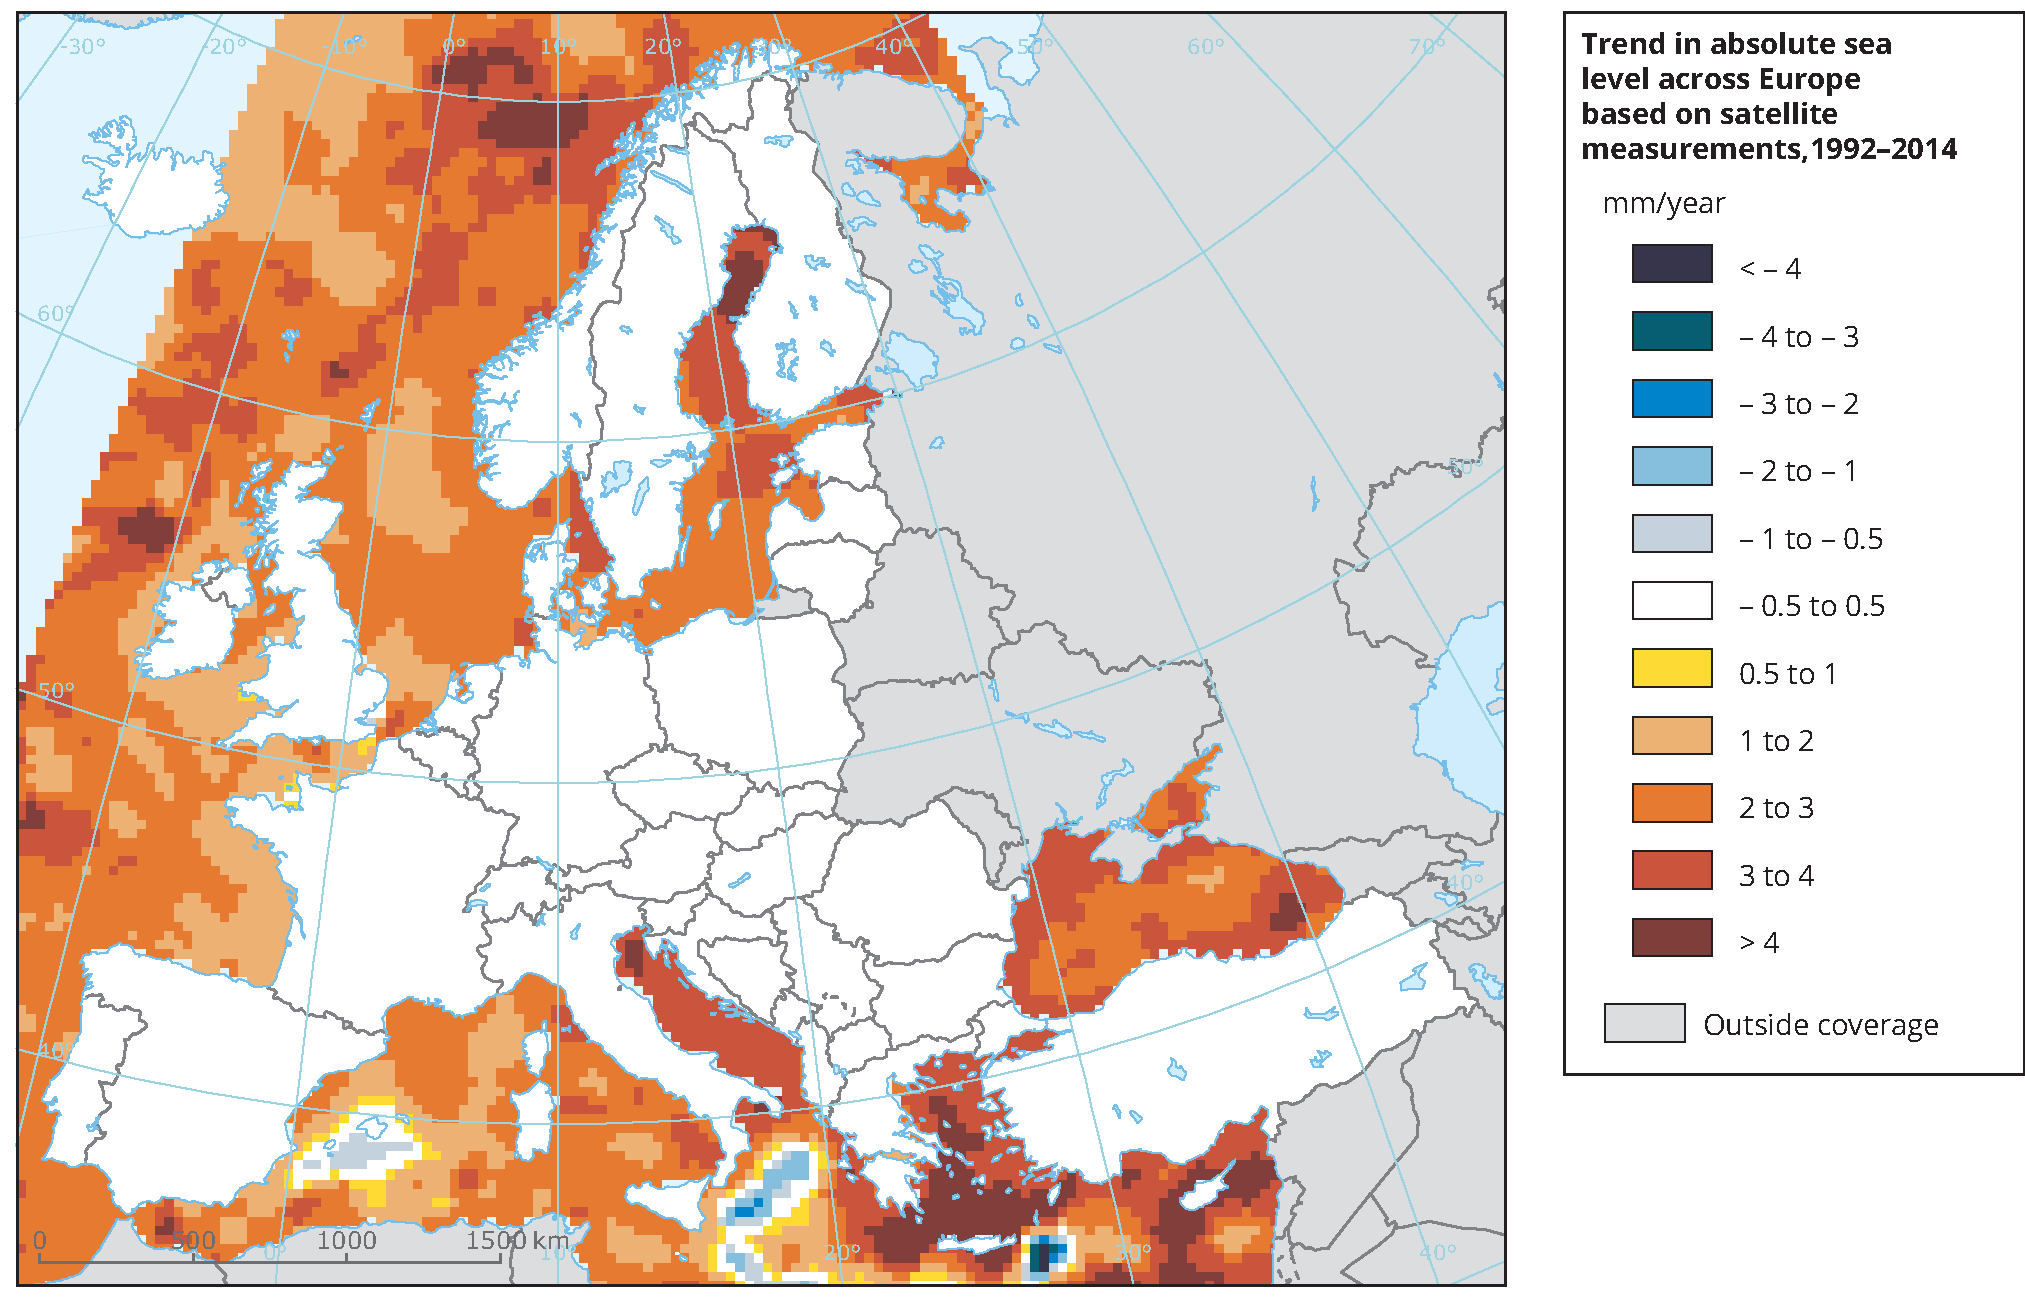 Trend in absolute sea level across Europe based on satellite measurements 